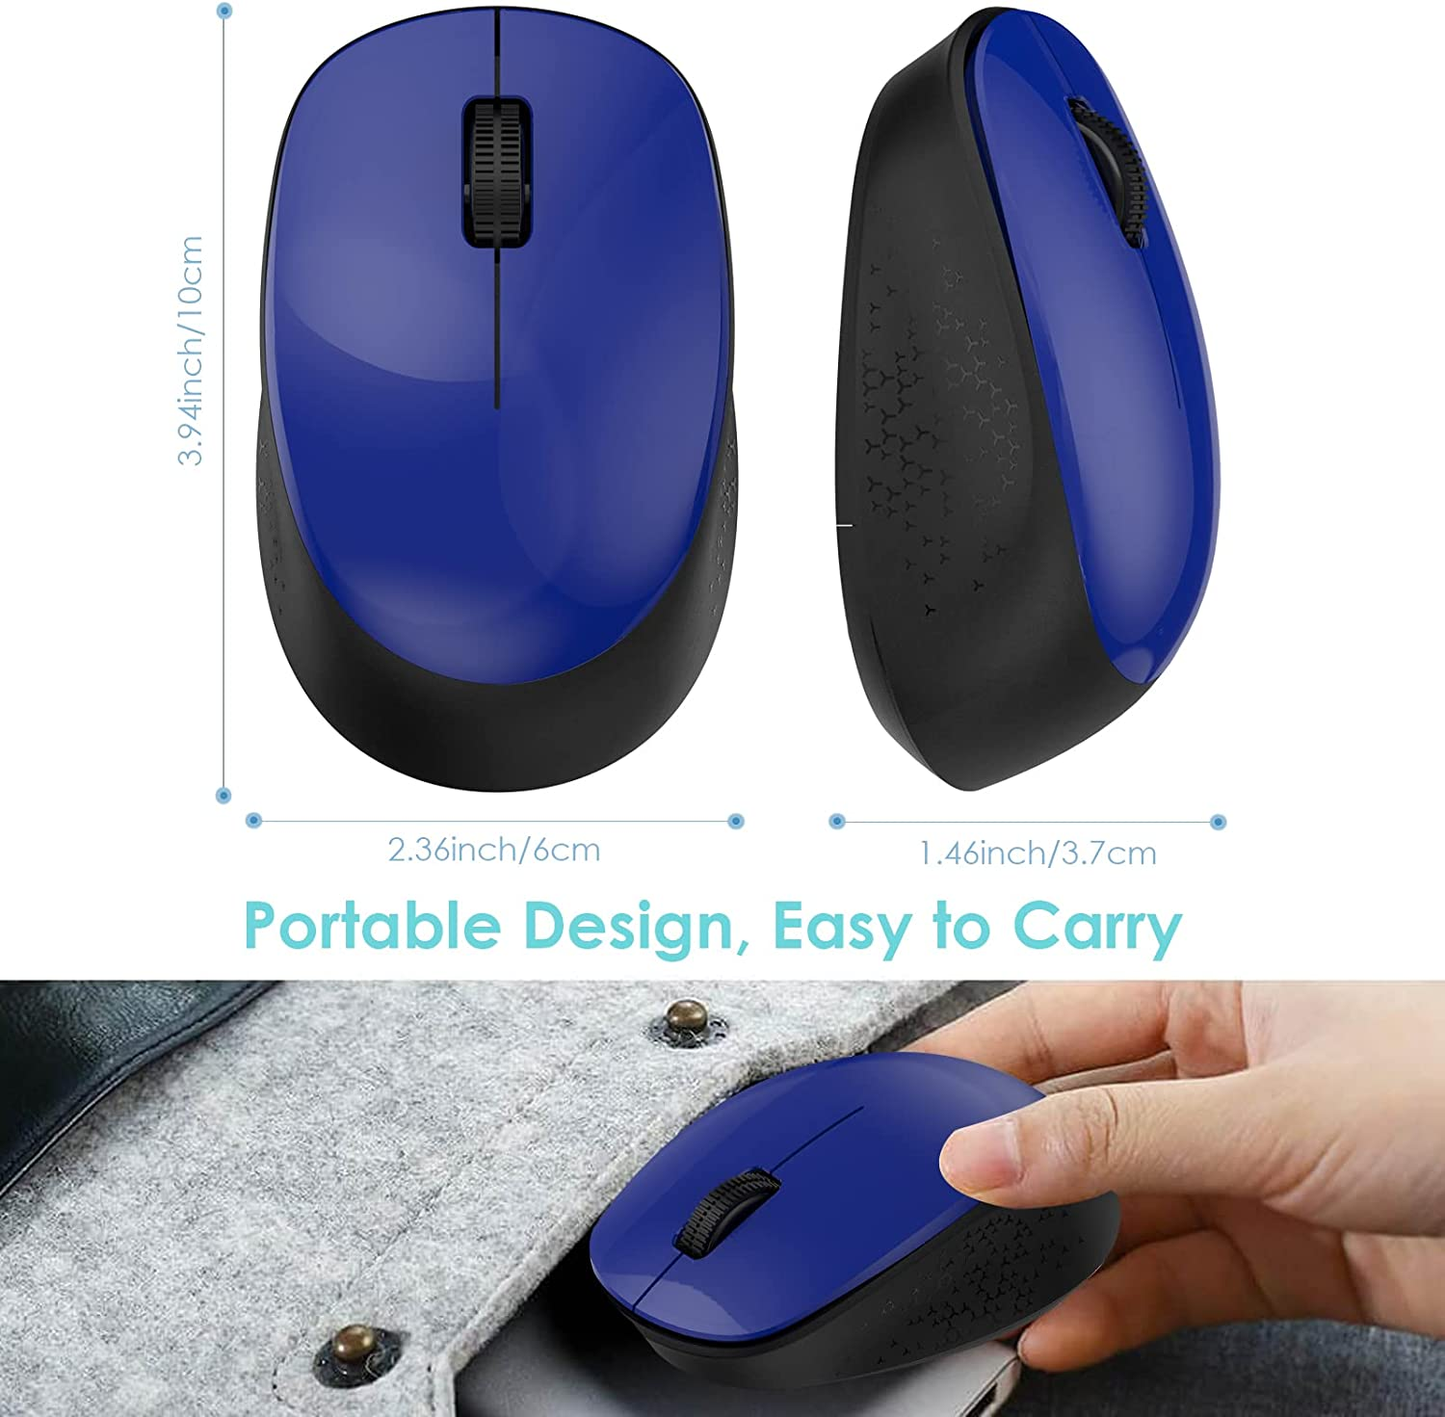 Wireless Mouse for Laptop 2.4G Silent Cordless USB Mouse Slim Wireless Optical Computer Mouse, 3 Buttons, AA Battery Used,1600 DPI for Windows 10/8/7/Mac/Macbook Pro/Air/Hp/Dell/Lenovo/Acer 